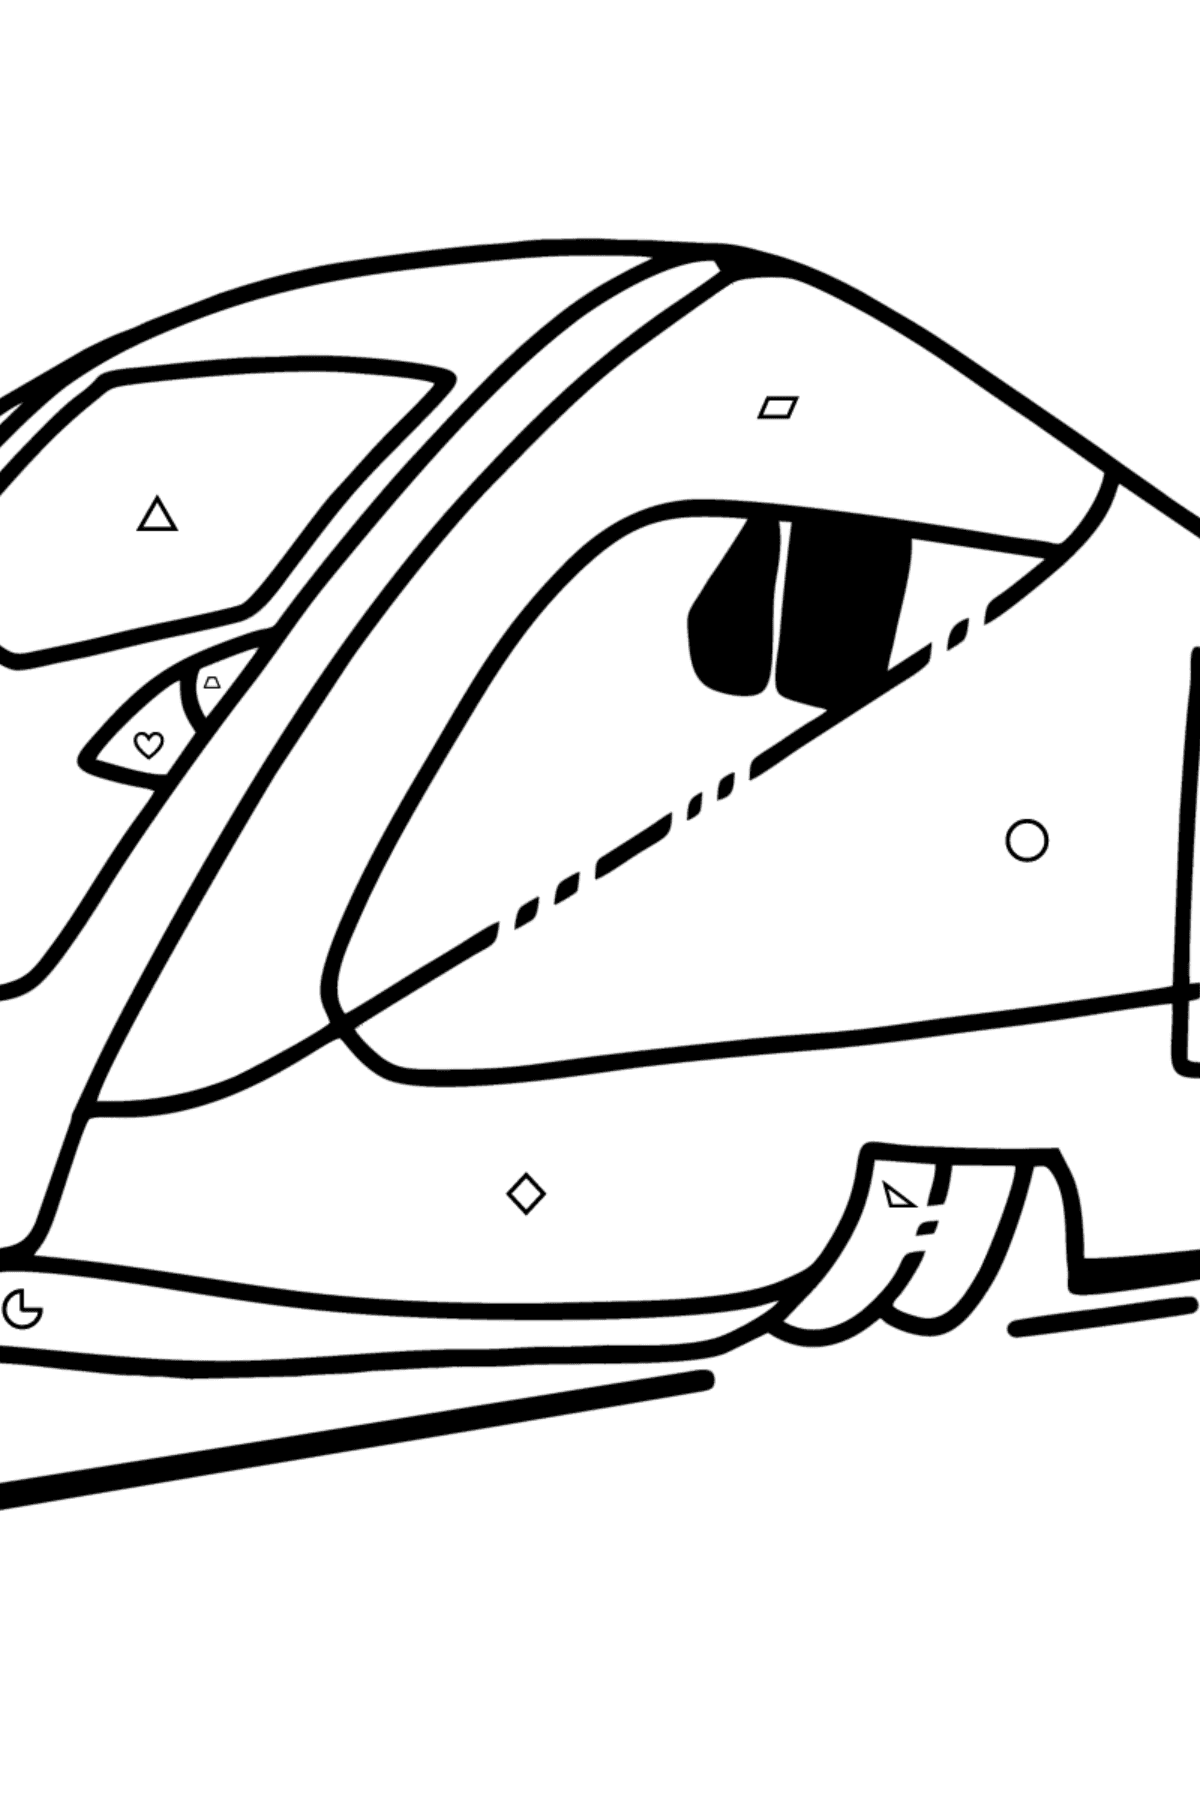 Train coloring page for children - Coloring by Geometric Shapes for Kids